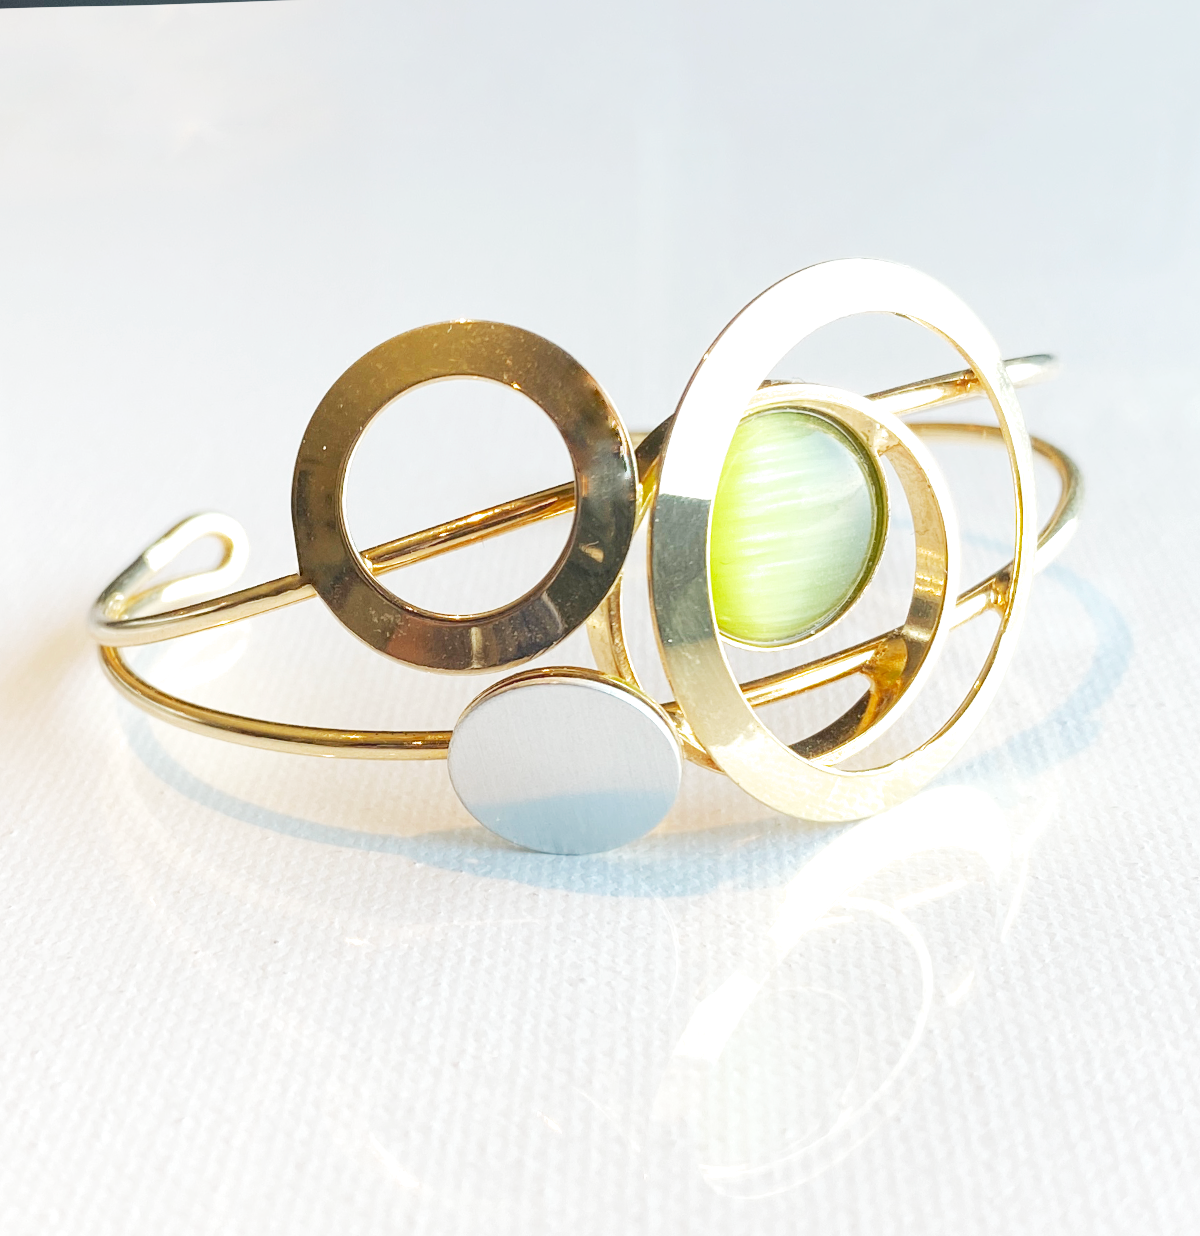 Christophe Poly Cuffs - Large - Green with Gold Loops - Brainchild Designs